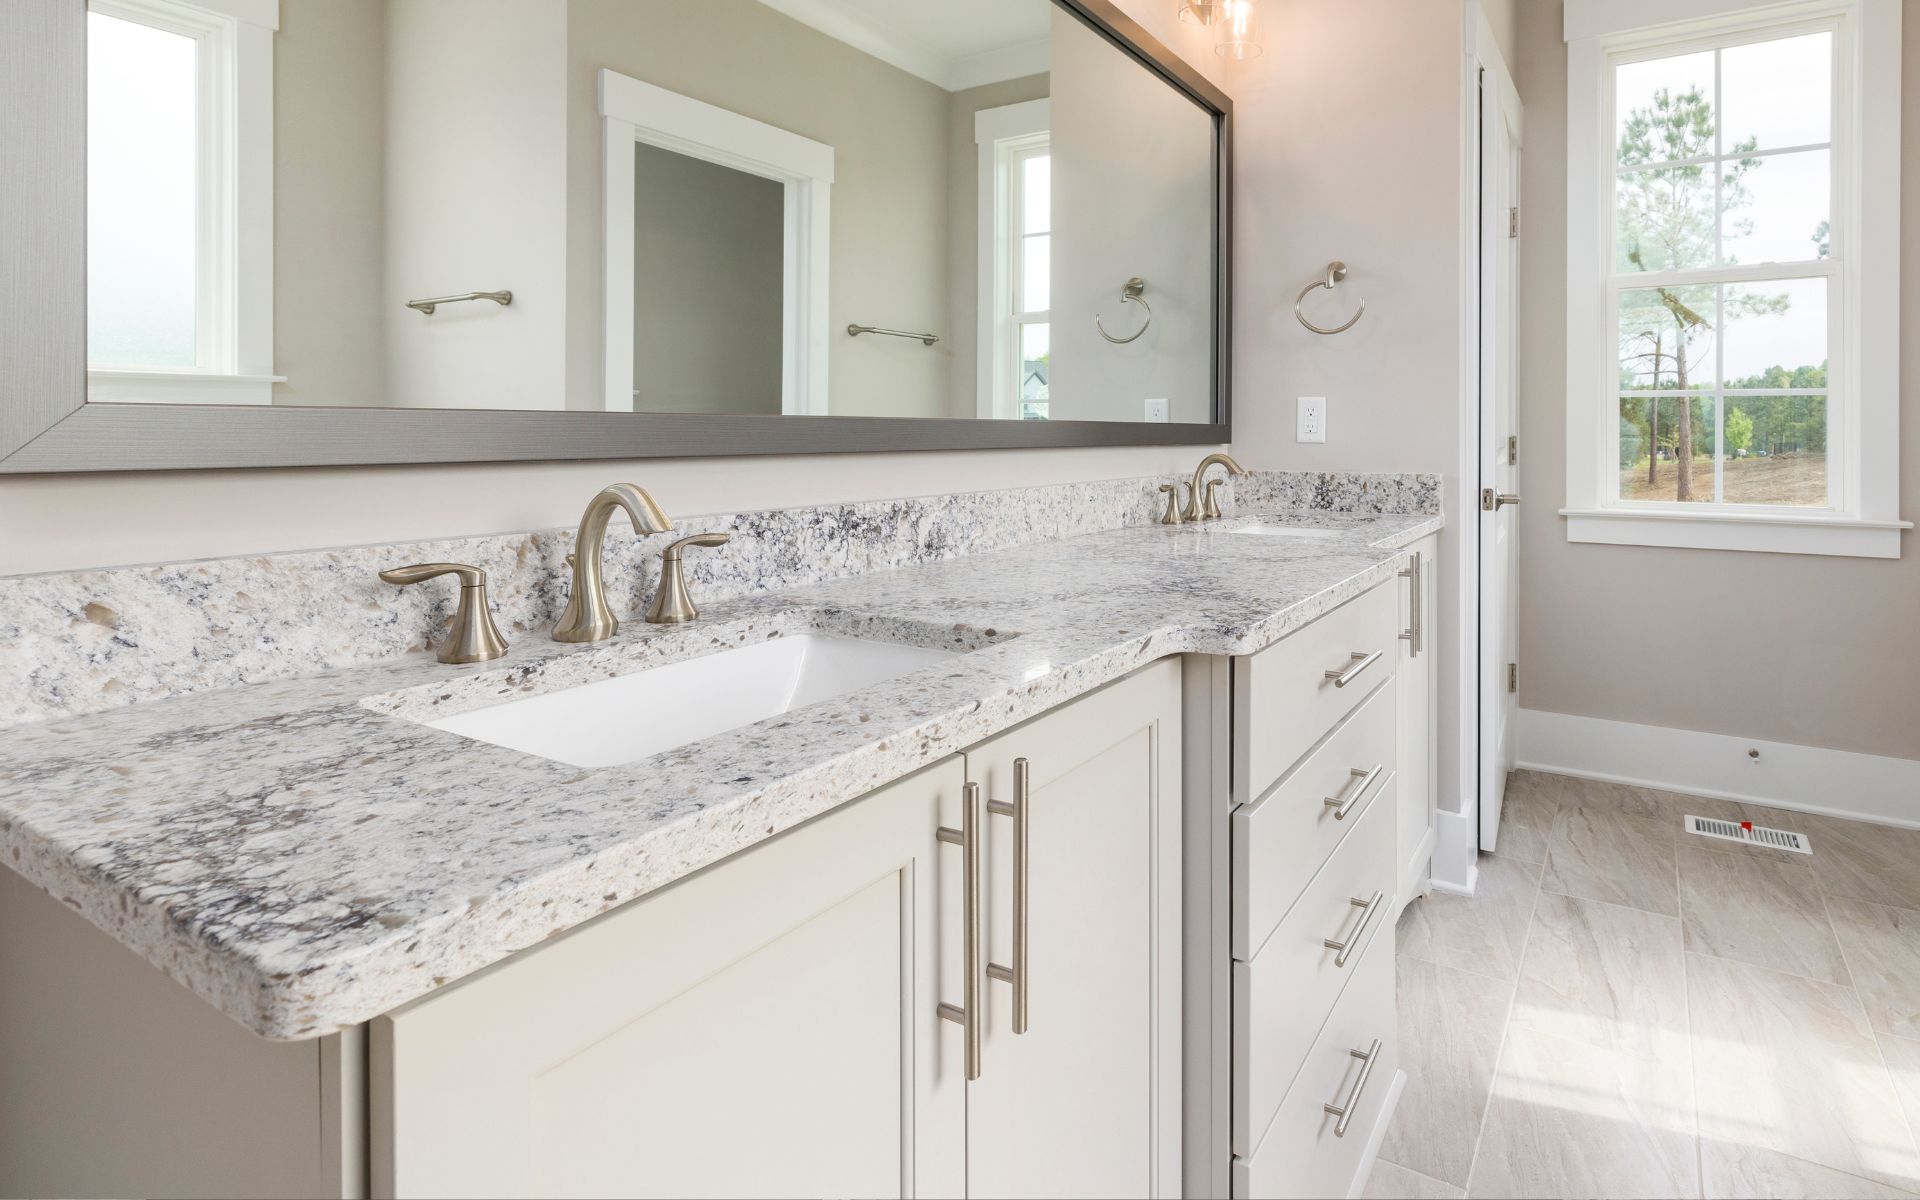 Bathroom with elegant white countertop, and cabinet